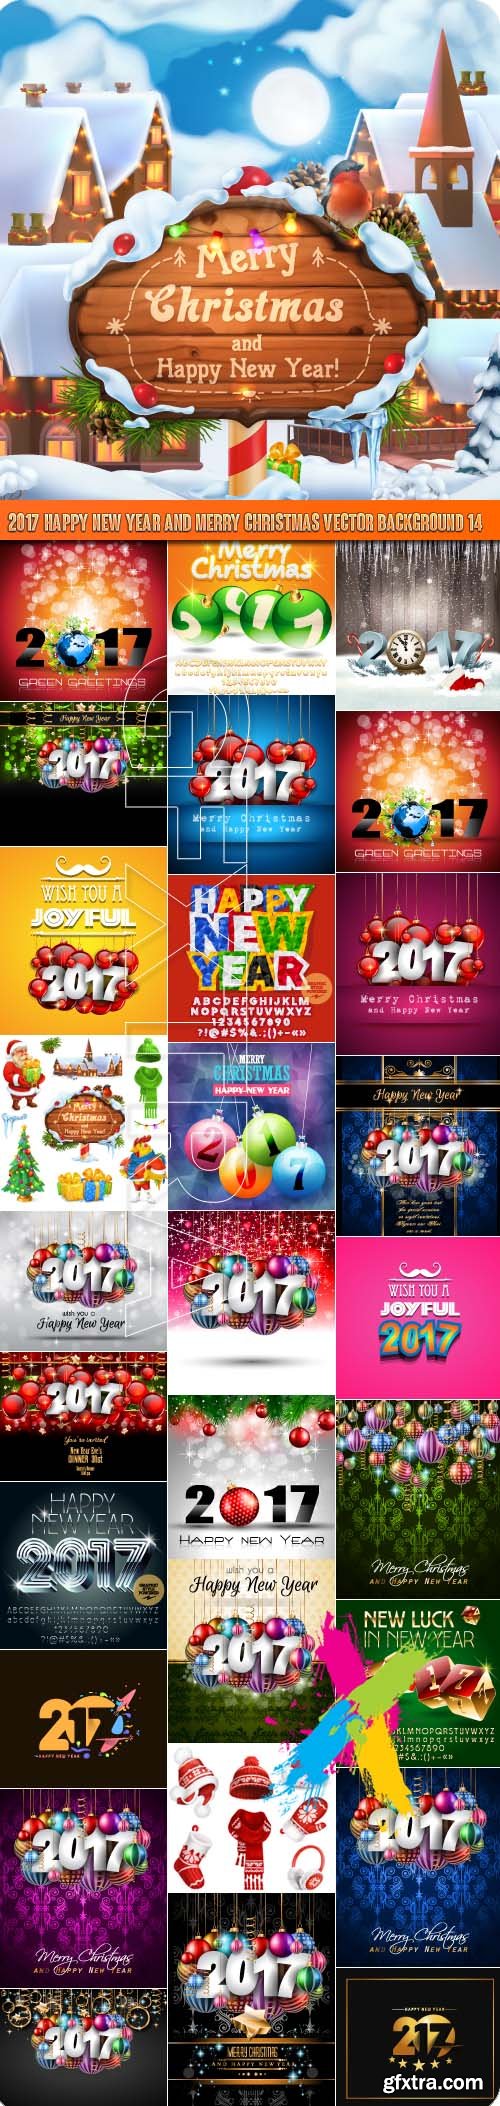 2017 Happy New Year and Merry Christmas vector background 14